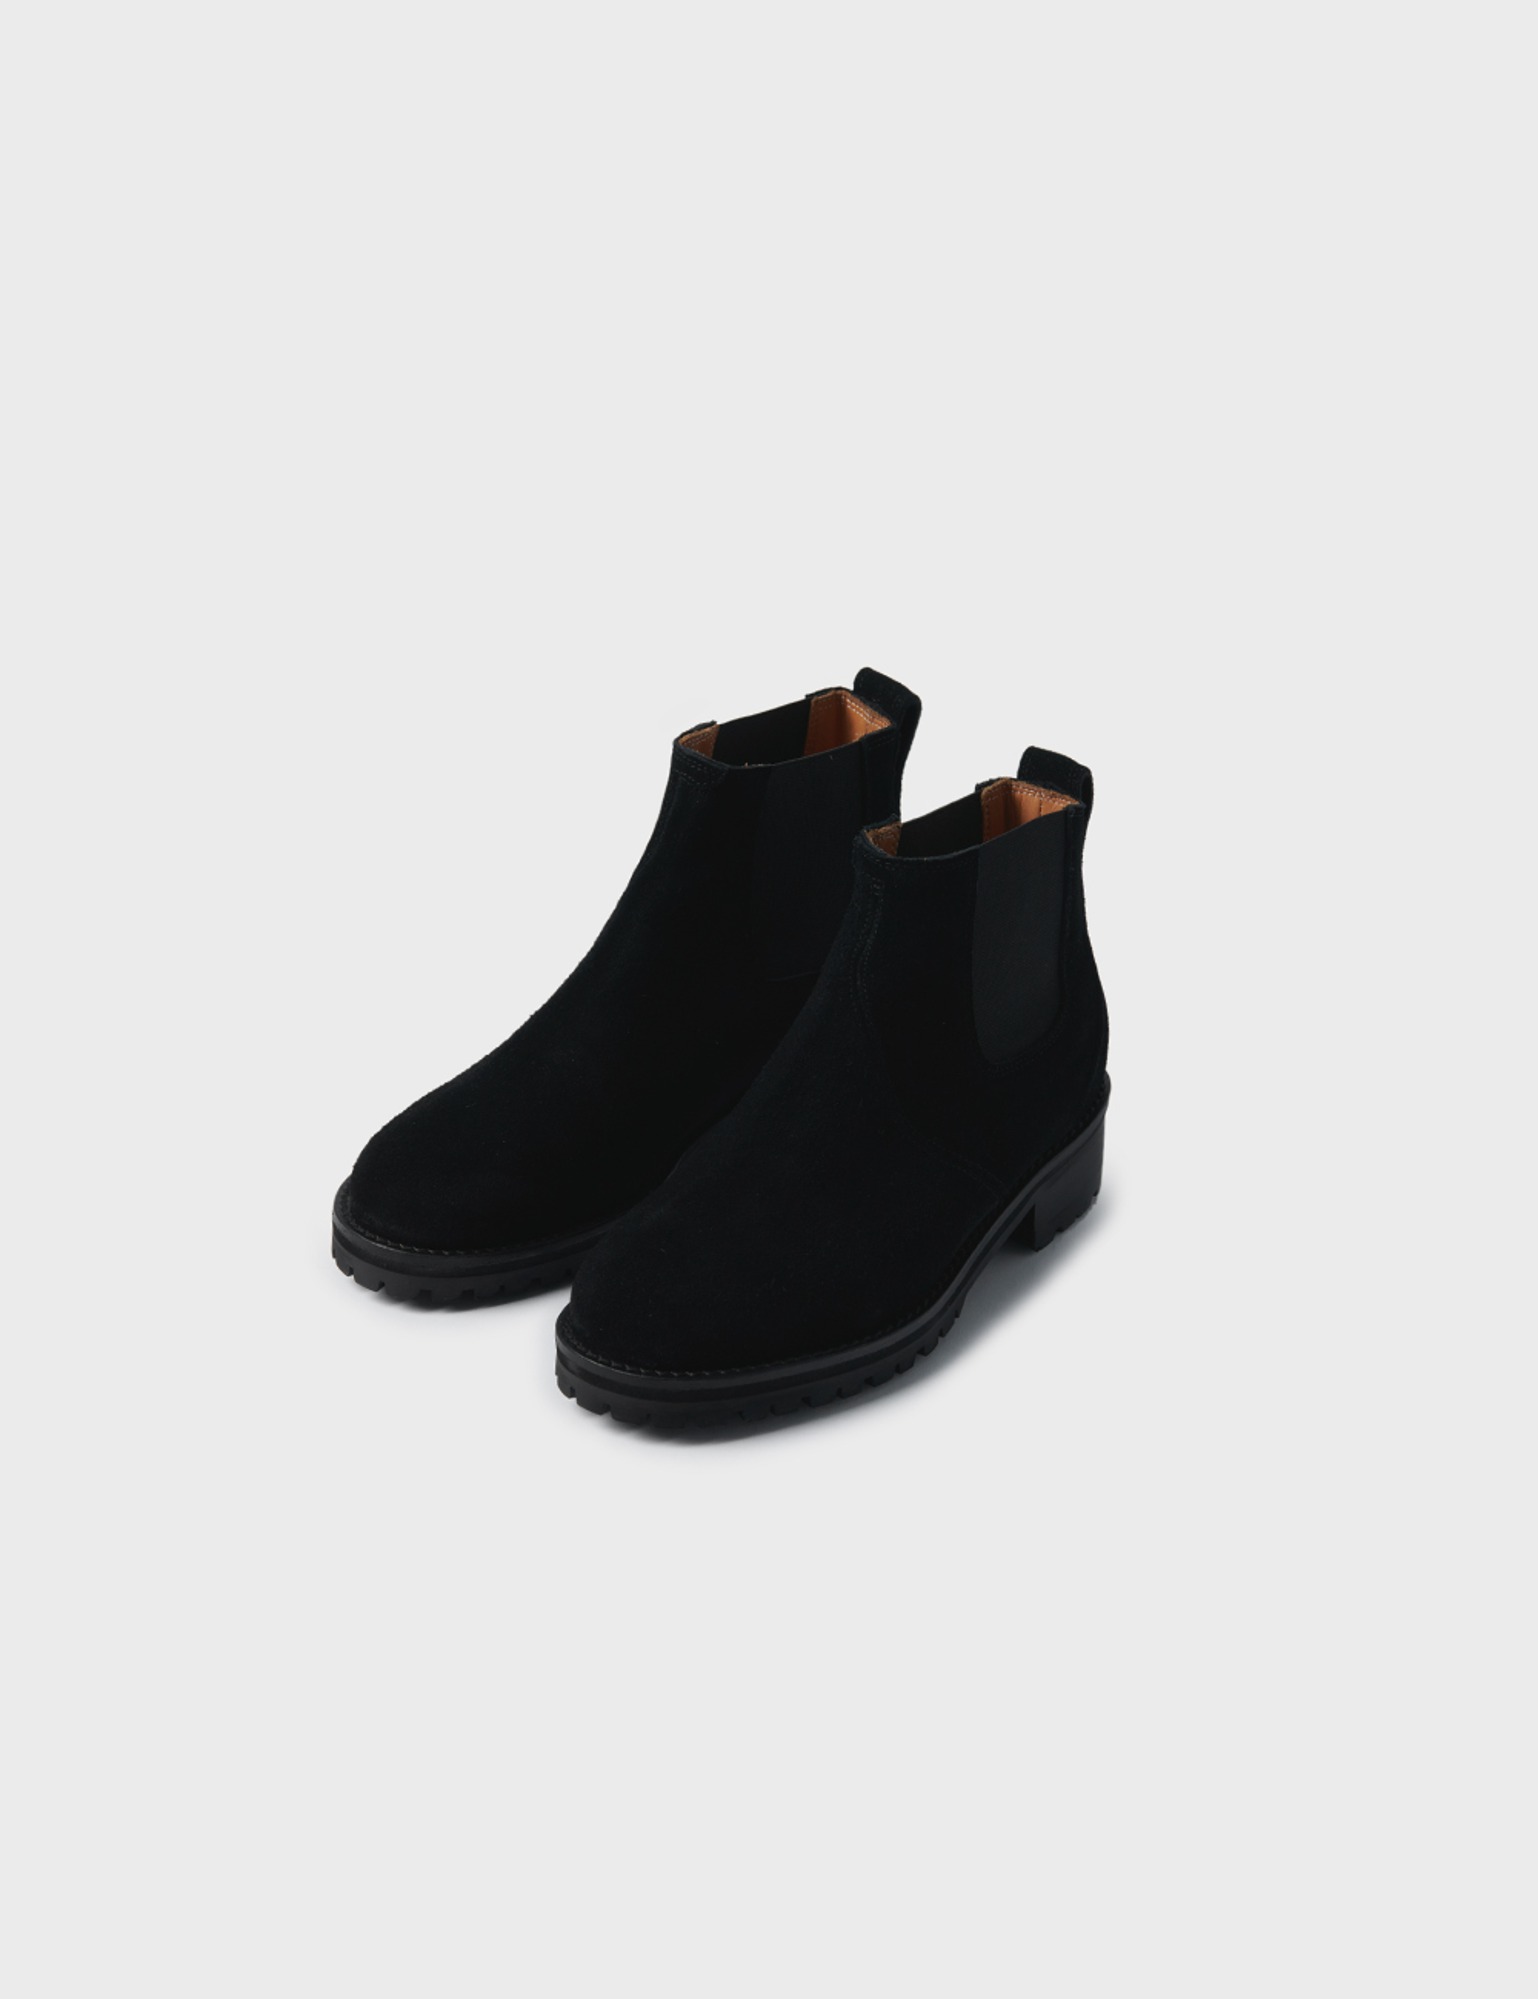 Ann chelsea boots(Suede)